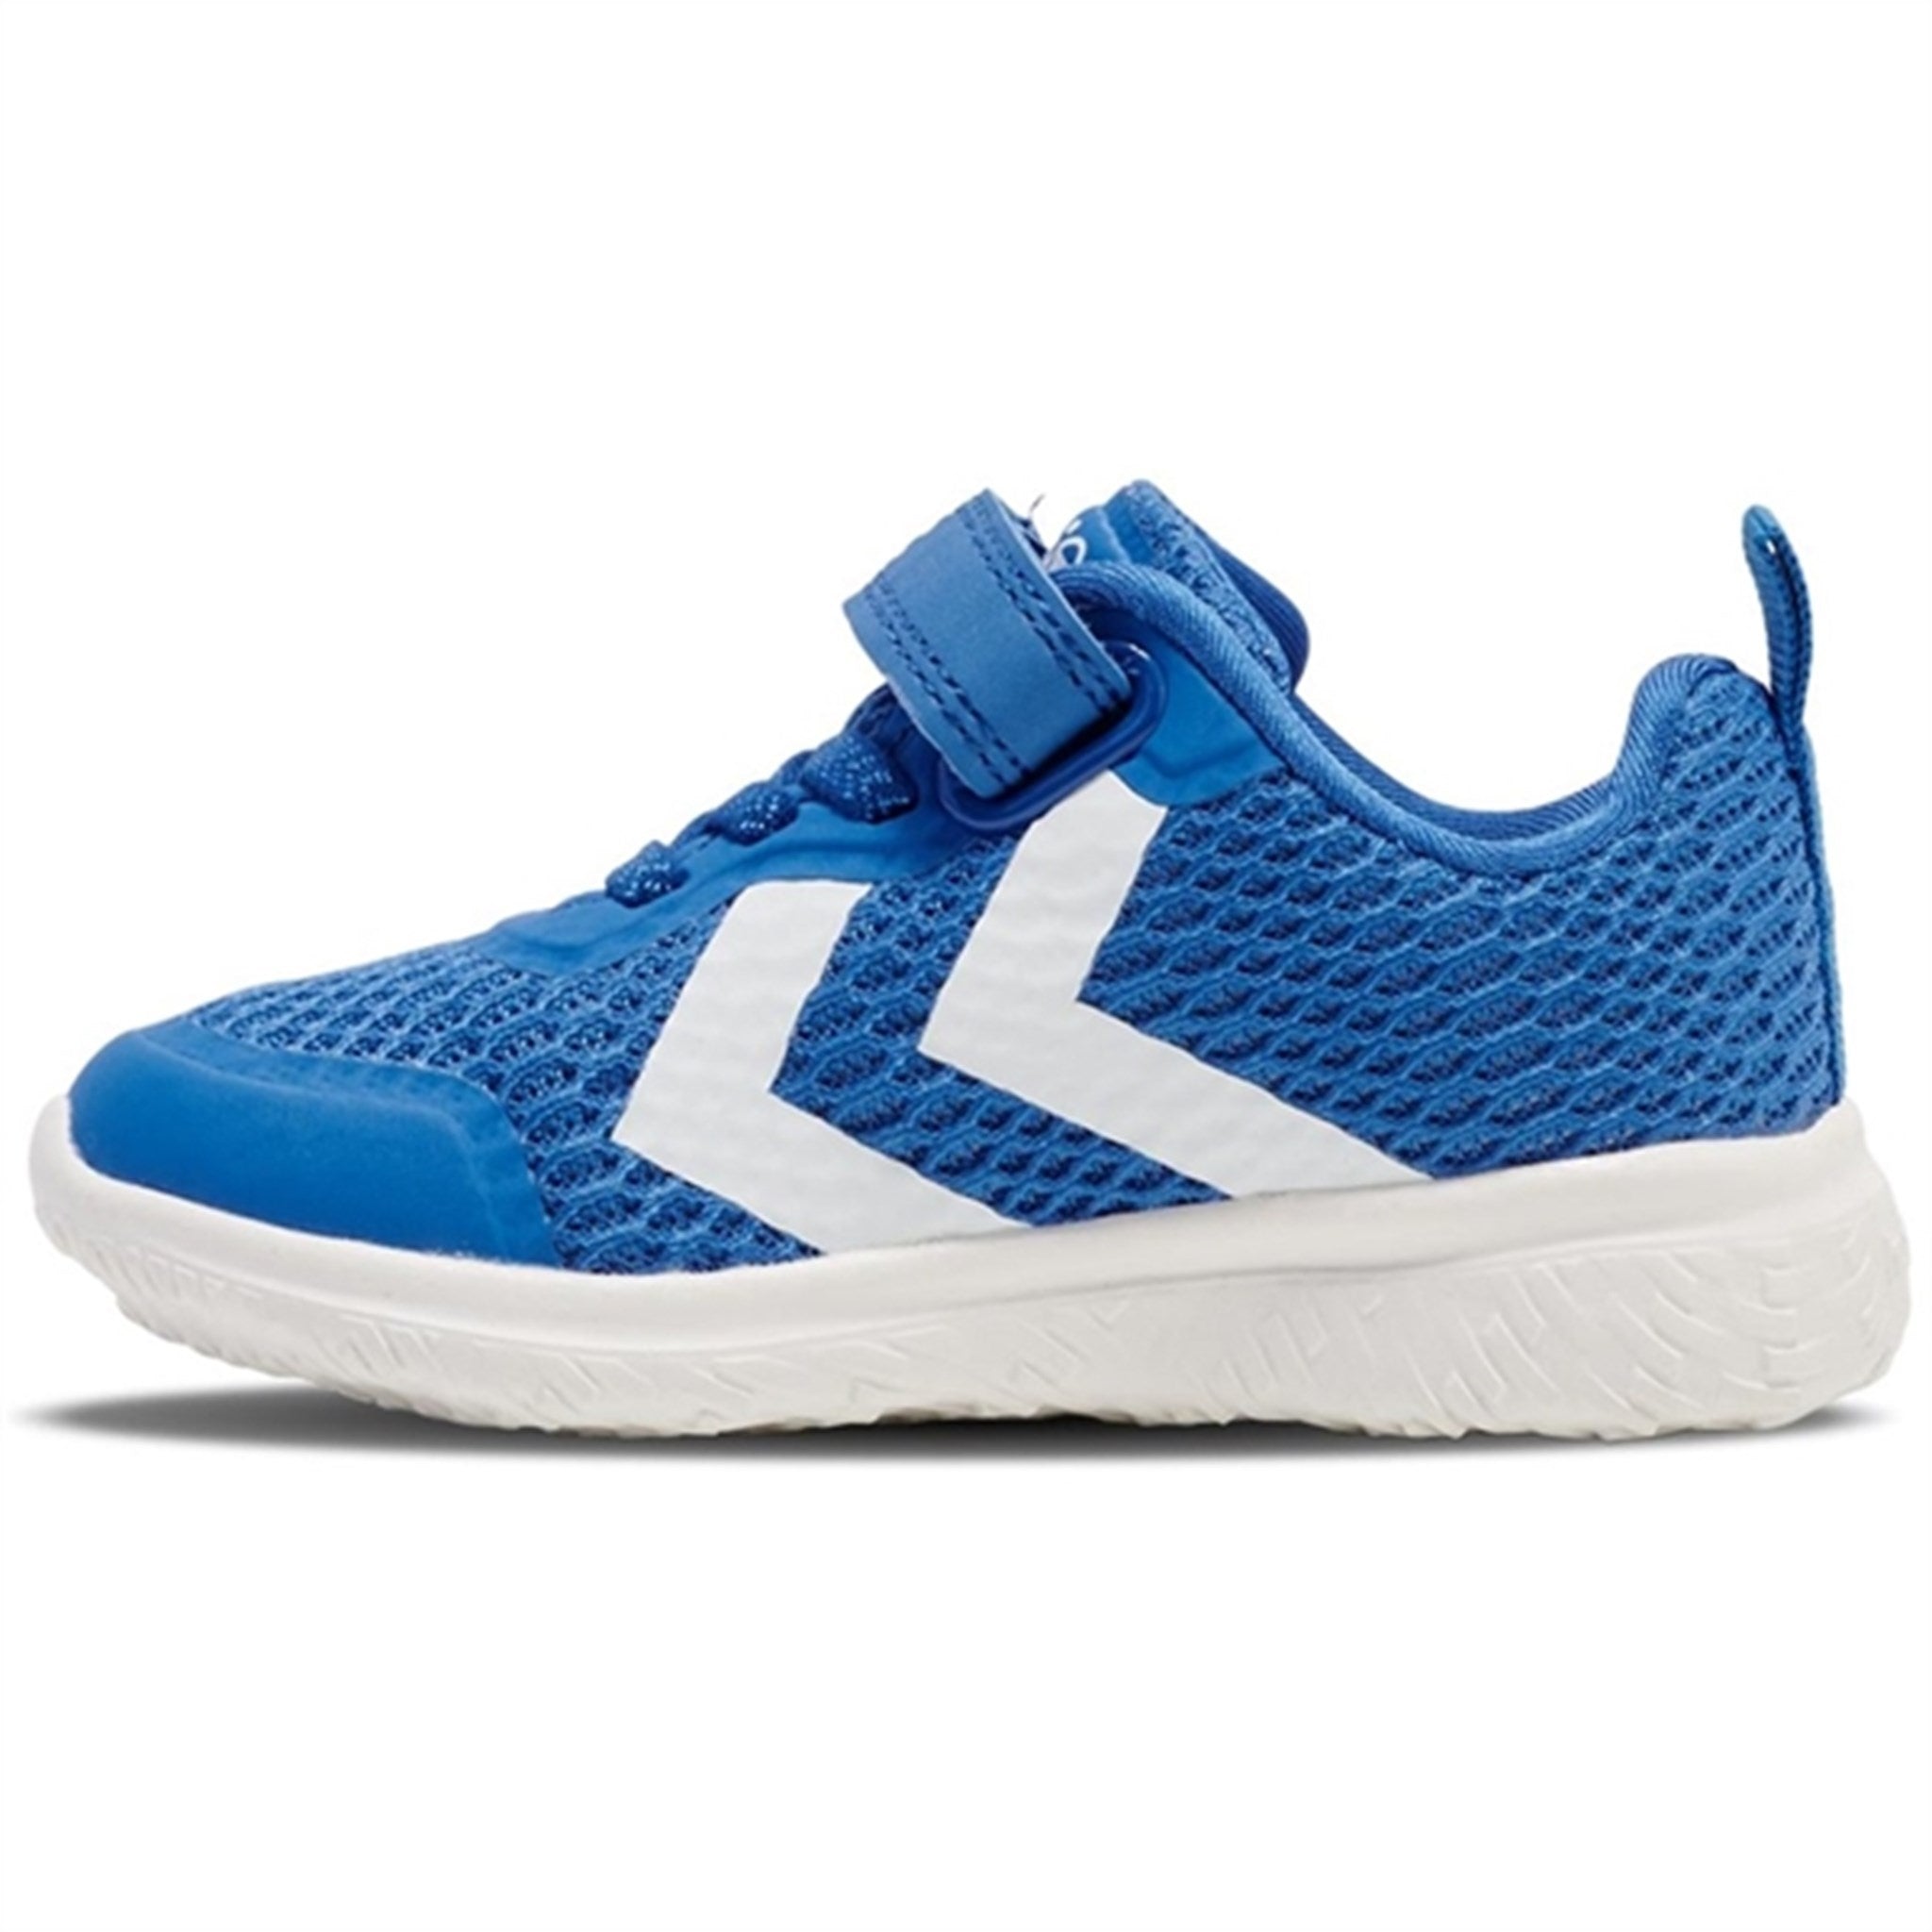 Hummel Actus Recycled Infant Sneakers Blue/White 6